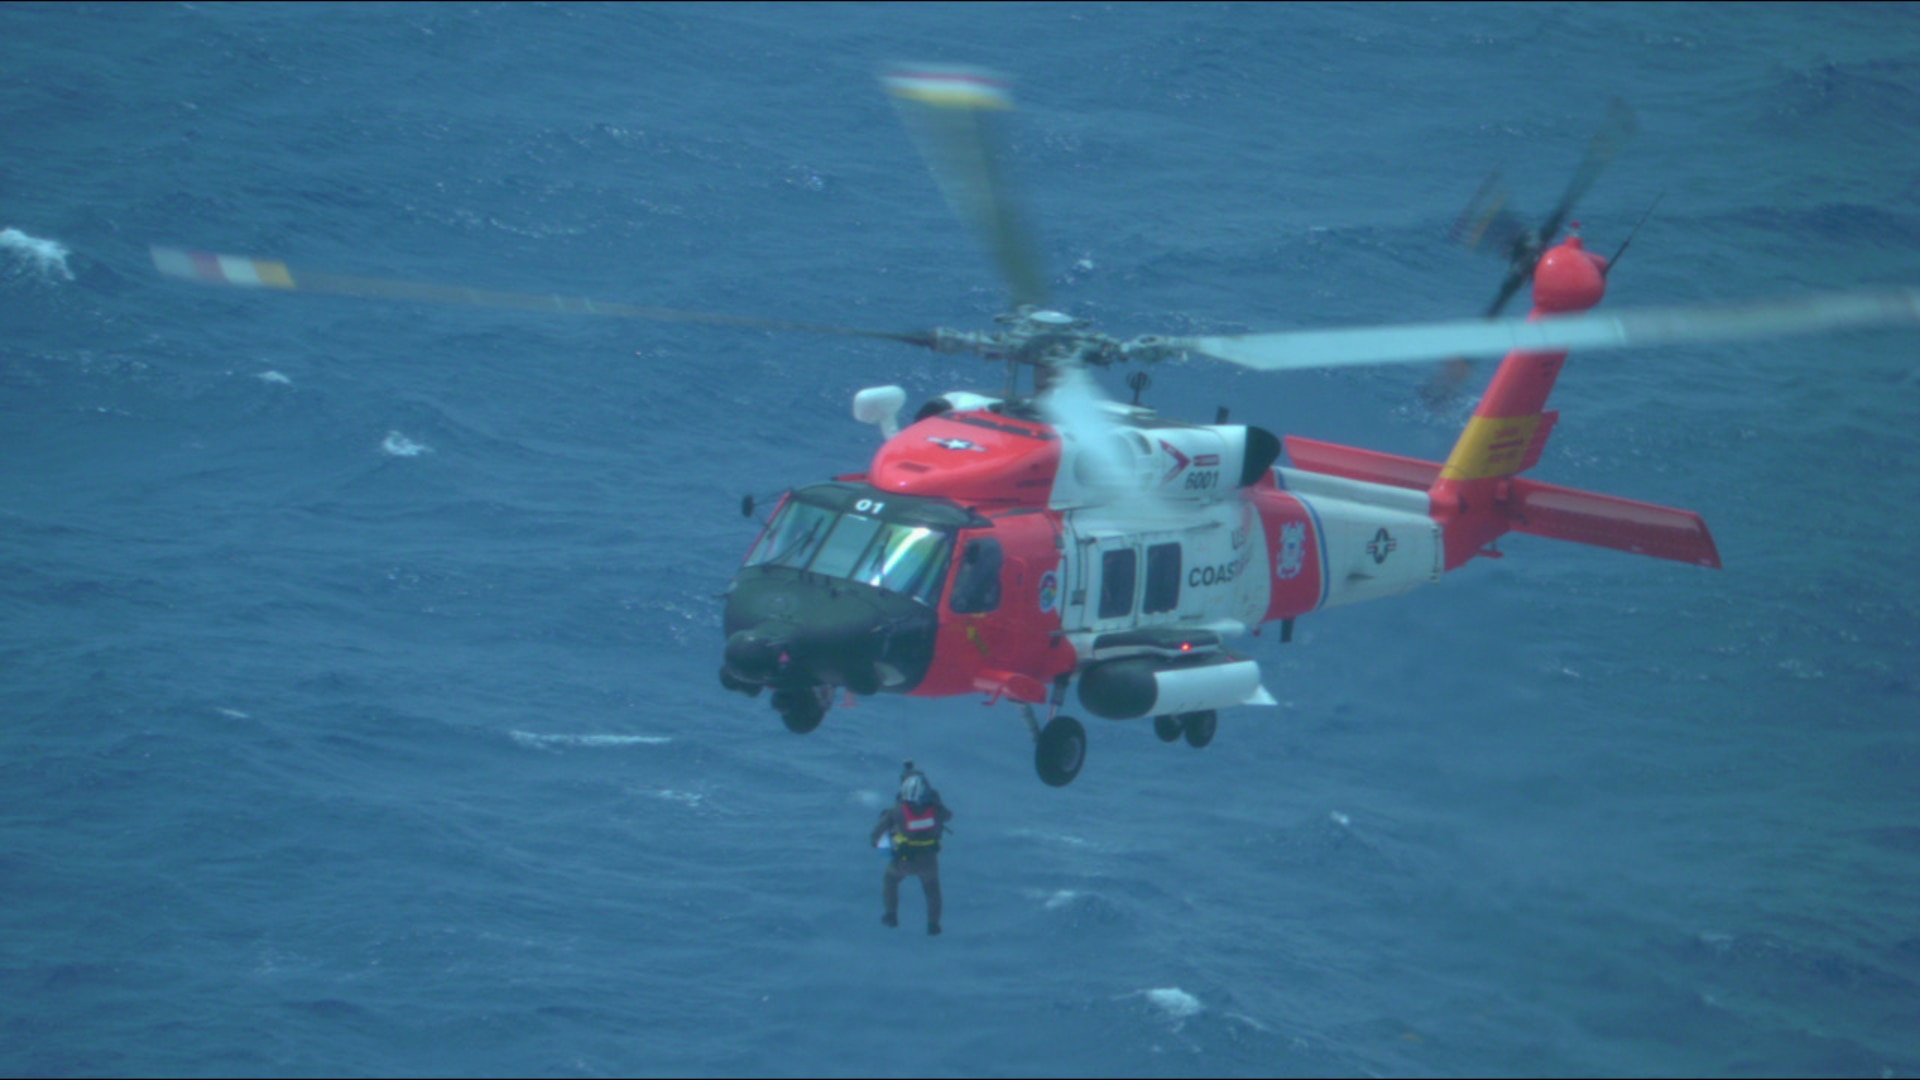 A Coast Guard MH-60T Jayhawk helicopter aircrew from Air Station Borinquen worked with the Disney Fantasy cruise ship crew during the medevac a pregnant woman passenger with health complications, April 15, 2024, approximately 180 miles northwest Puerto Rico. The medevac patient was a 35-year-old, U.S. citizen, who was transported to the ‘Centro Medico’ Hospital in San Juan, Puerto Rico to receive higher level of medical care. (U.S. Coast Guard photo)